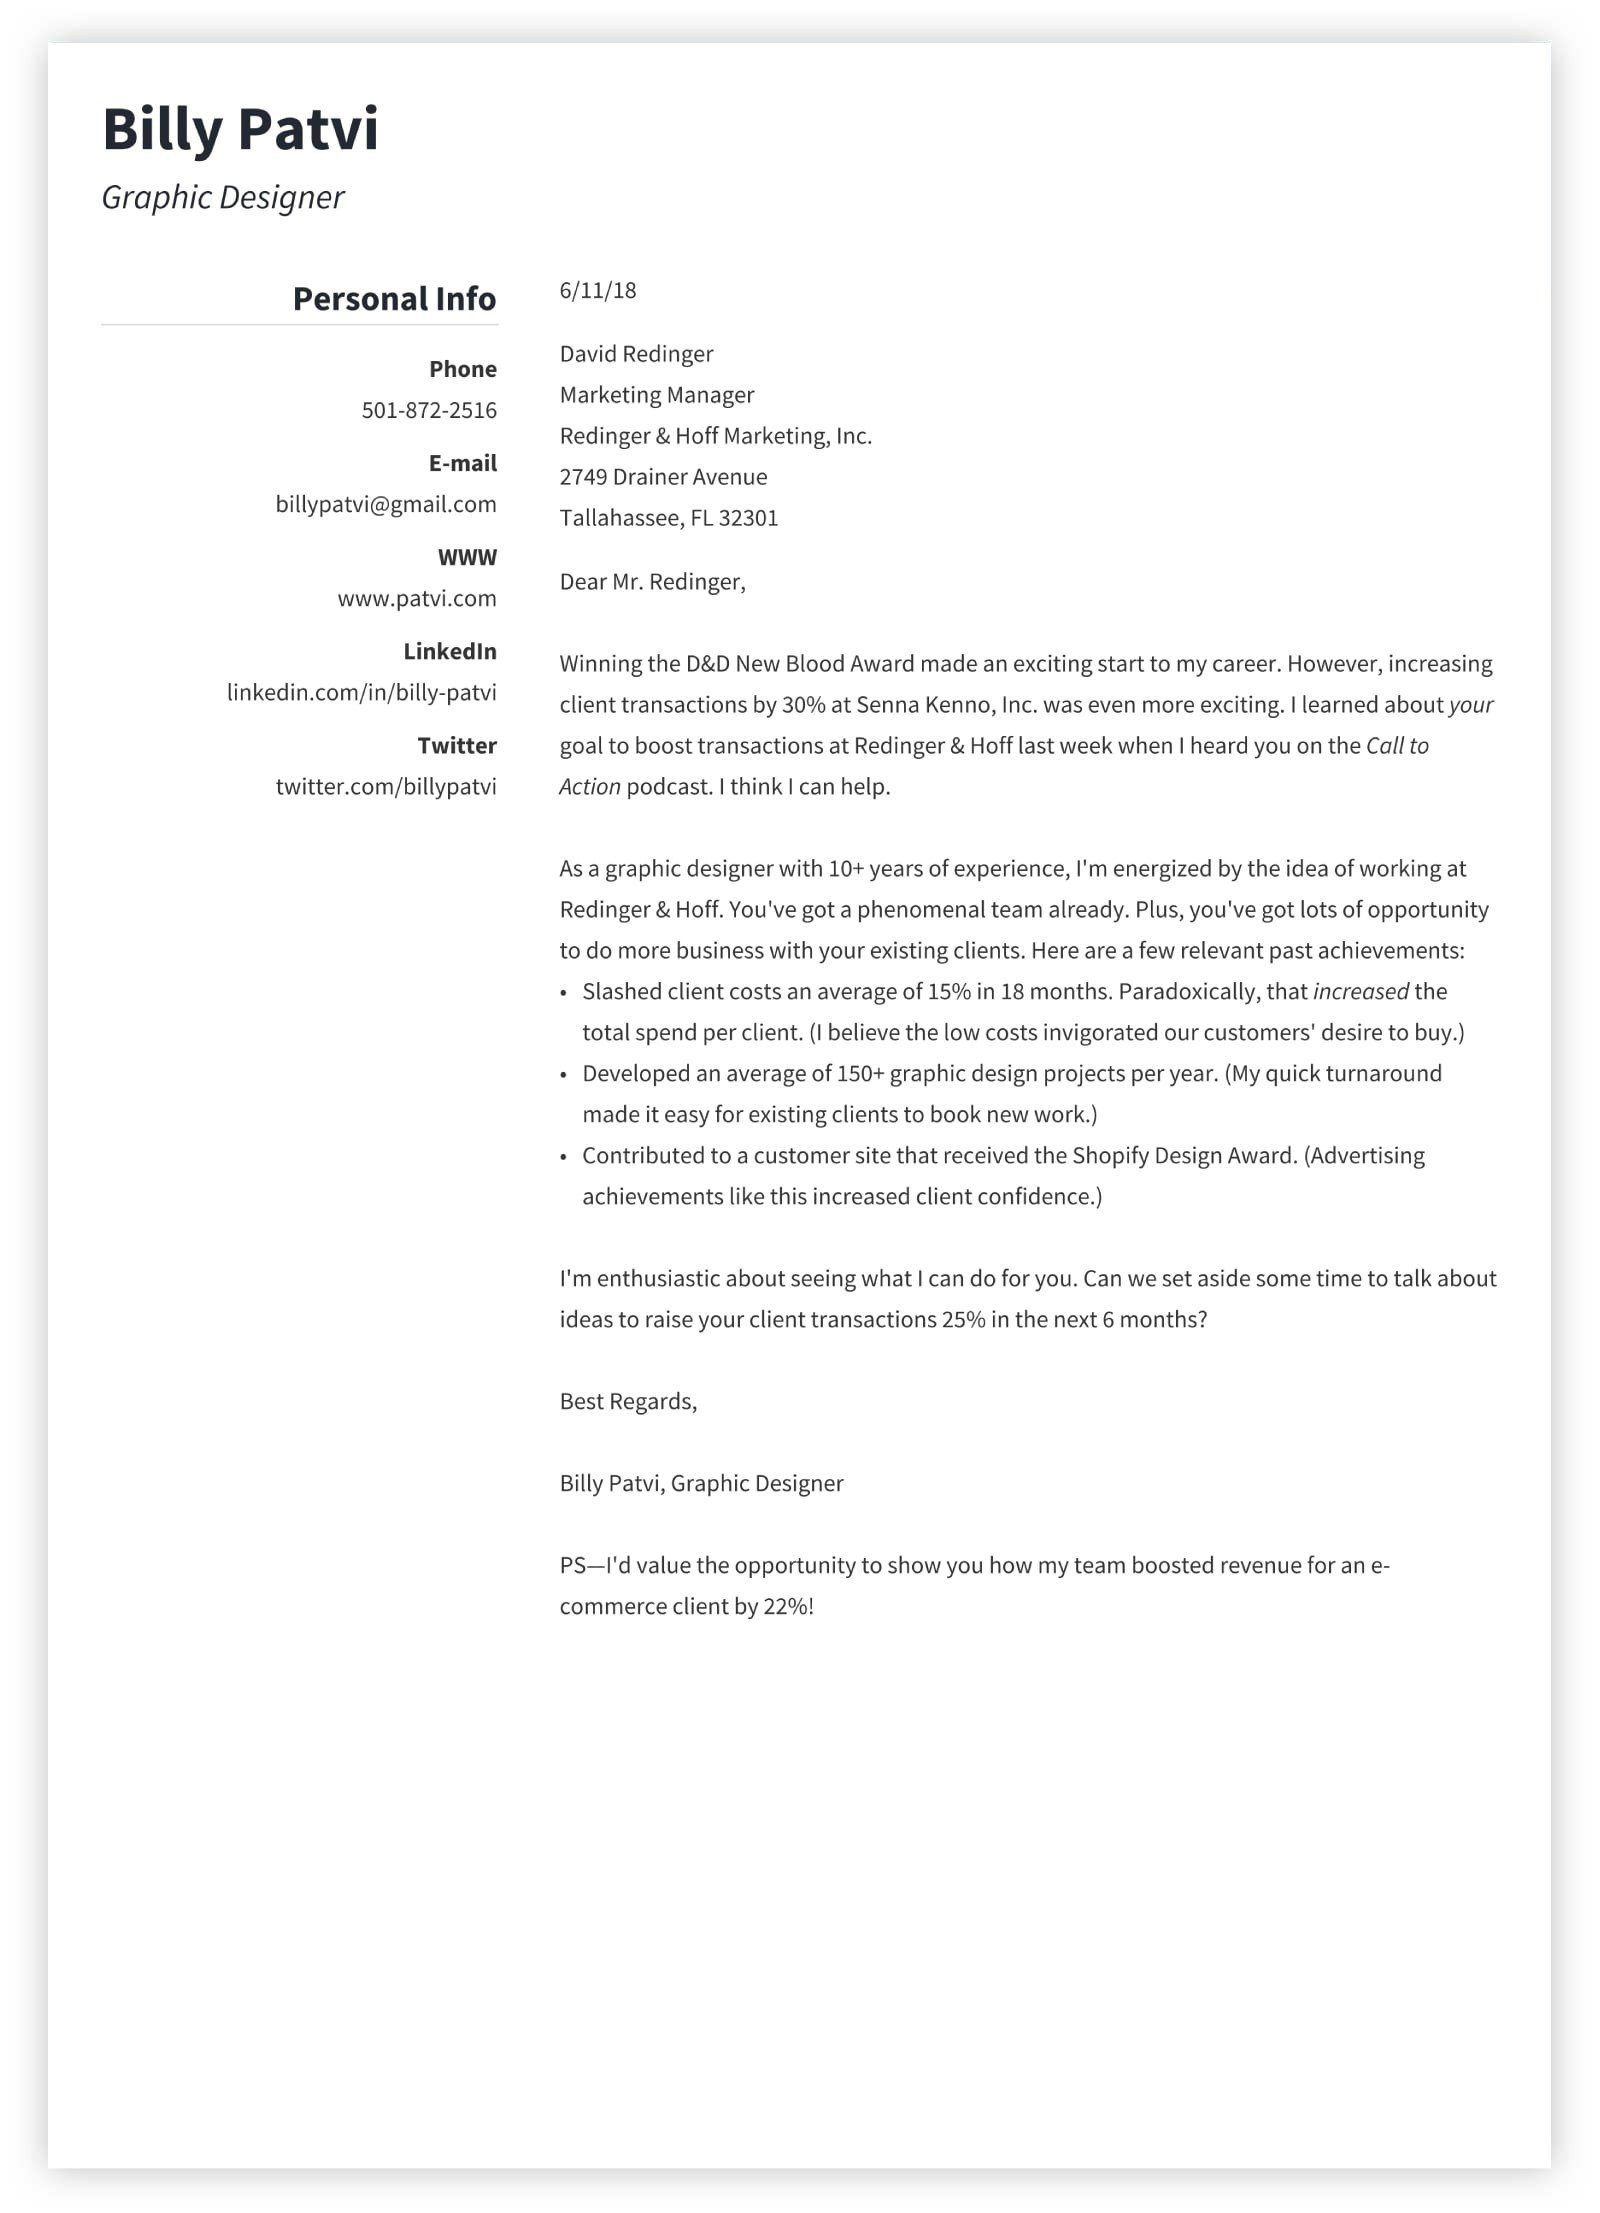 Samples Of Introduction Letter for Resume How to Write A Cover Letter for Any Job In 8 Simple Steps